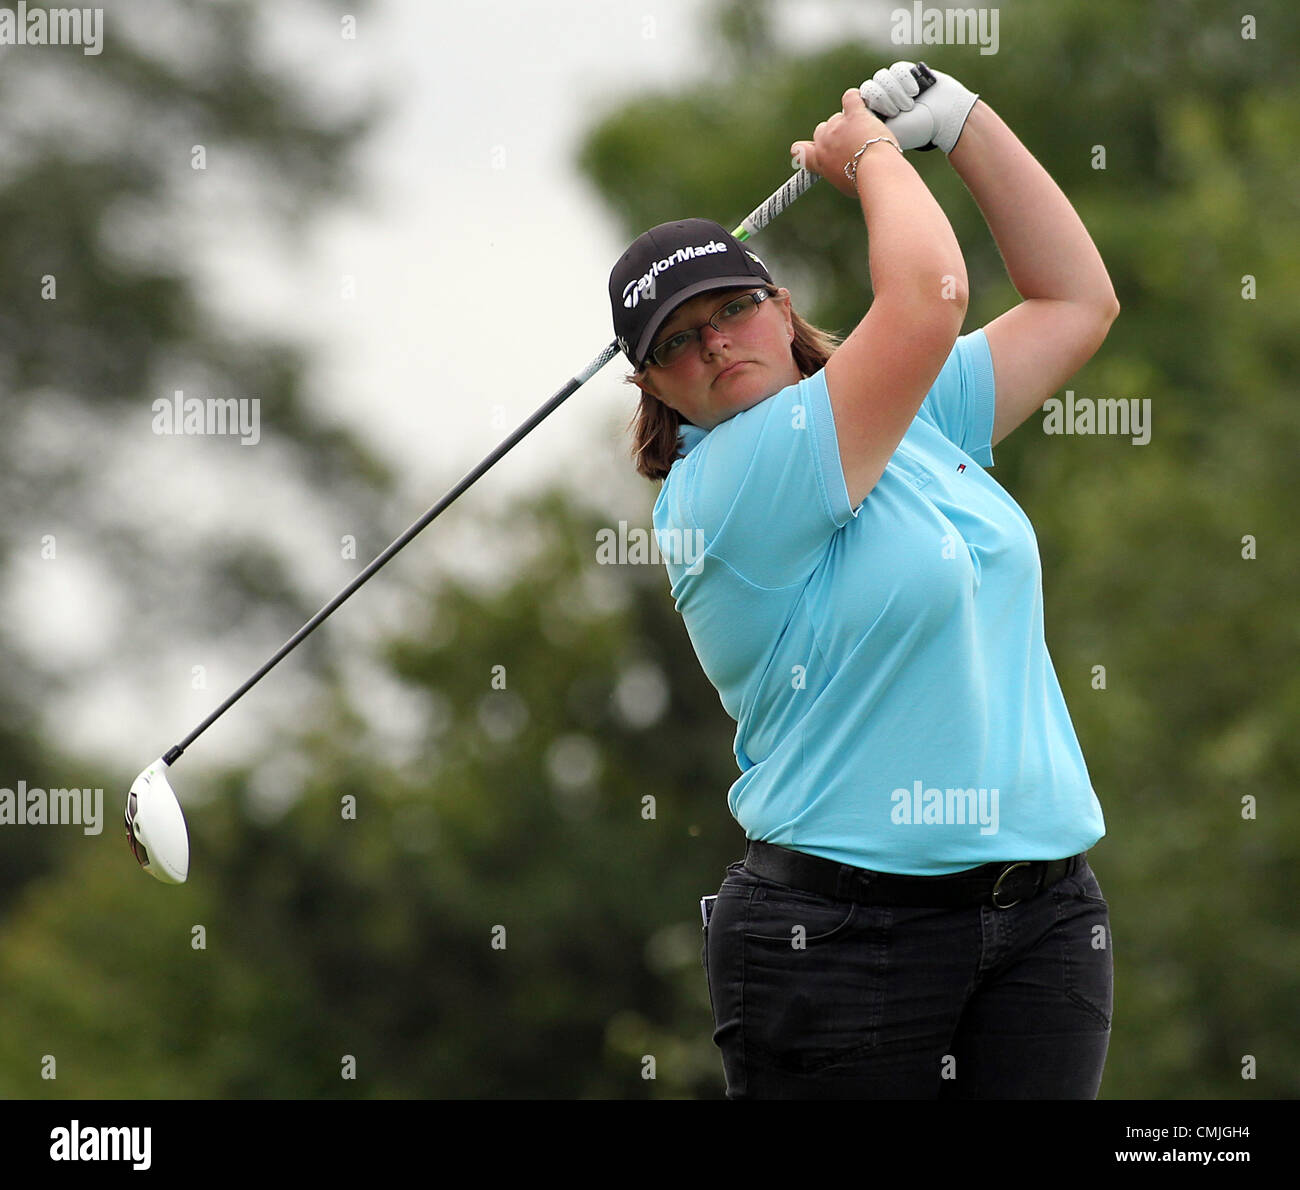 Buckinghamshire, England, UK. Thursday 16th August 2012. England's Claire Aitken in action during the first round of the ISPS Handa Ladies British Masters event at The Buckinghamshire Golf Club, Denham, Greater London. Stock Photo